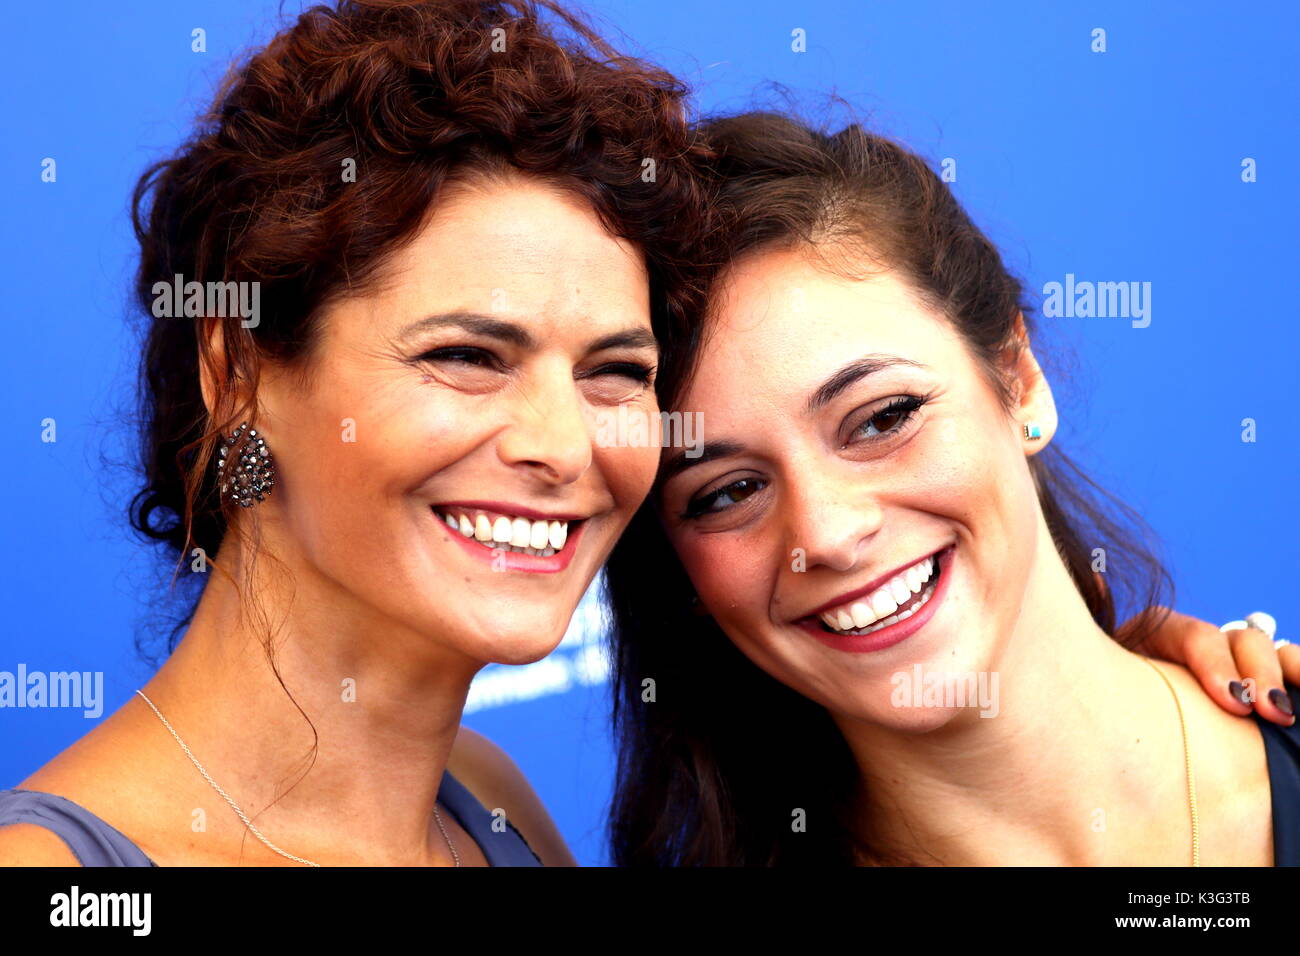 Venice, Italy. 2nd September, 2017. Celeste Casciaro (L) and Alessandra De Luca (R) poses during the 'La Vita in comune'' photocall during the 74th Venice International Film Festival at Lido of Venice on 2nd September, 2017. Credit: Andrea Spinelli/Alamy Live News Stock Photo